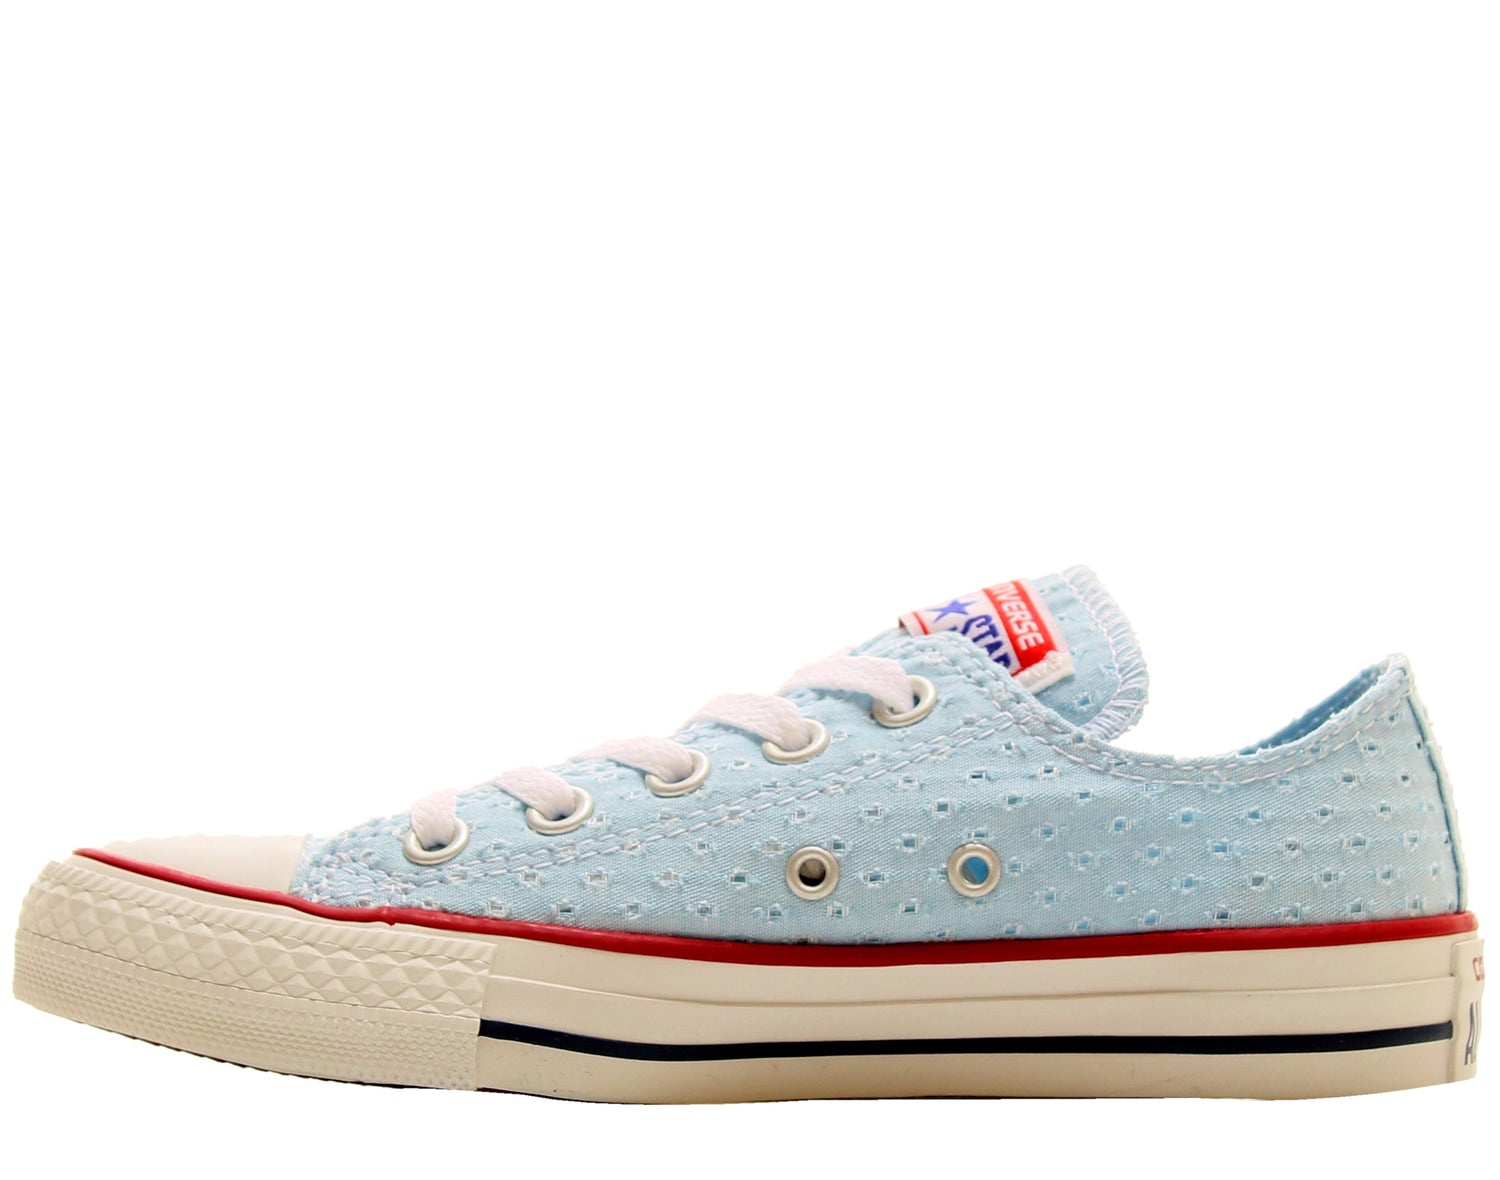 Converse Chuck Taylor All Star Fountain OX Low Top Women's Sneakers